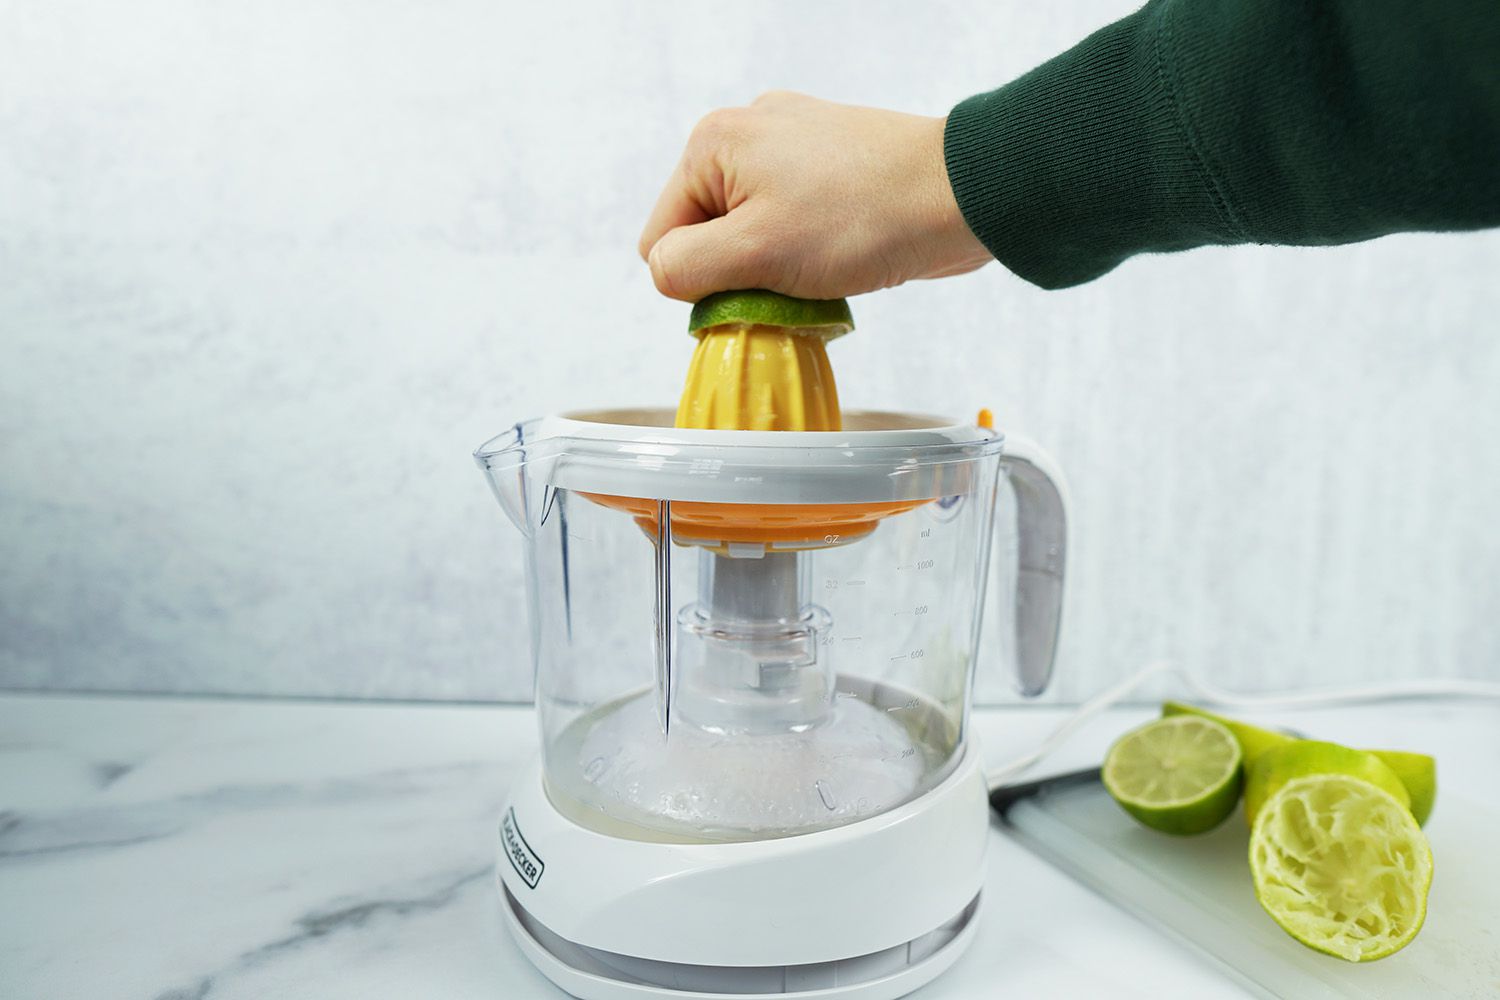 A hand juicing a lime half on an electric citrus juicer